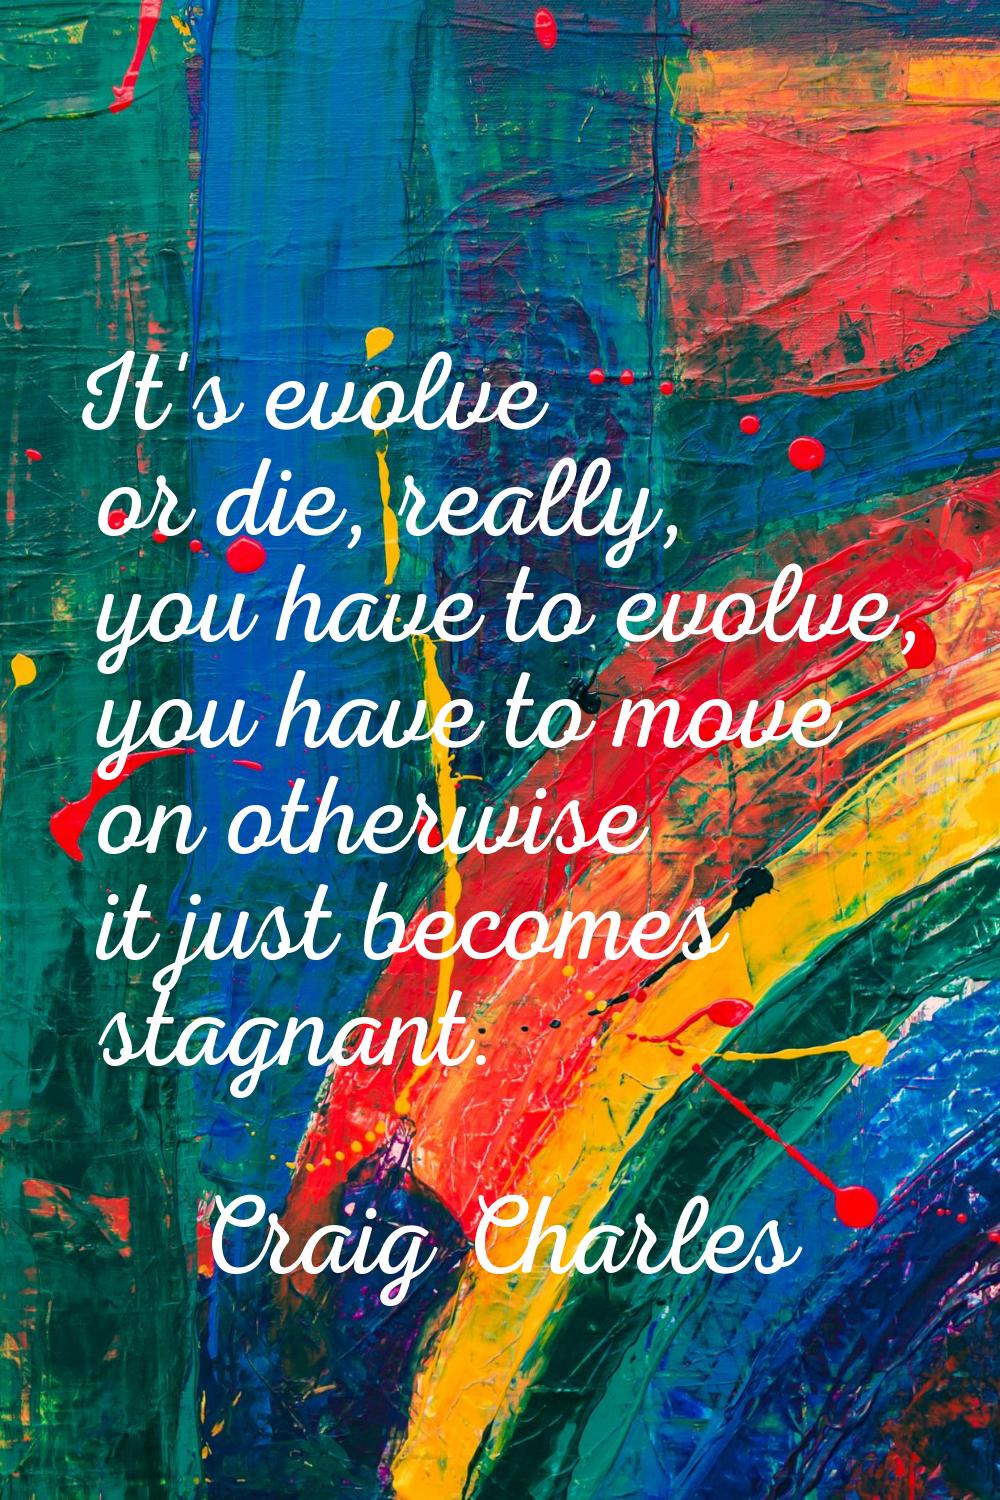 It's evolve or die, really, you have to evolve, you have to move on otherwise it just becomes stagn